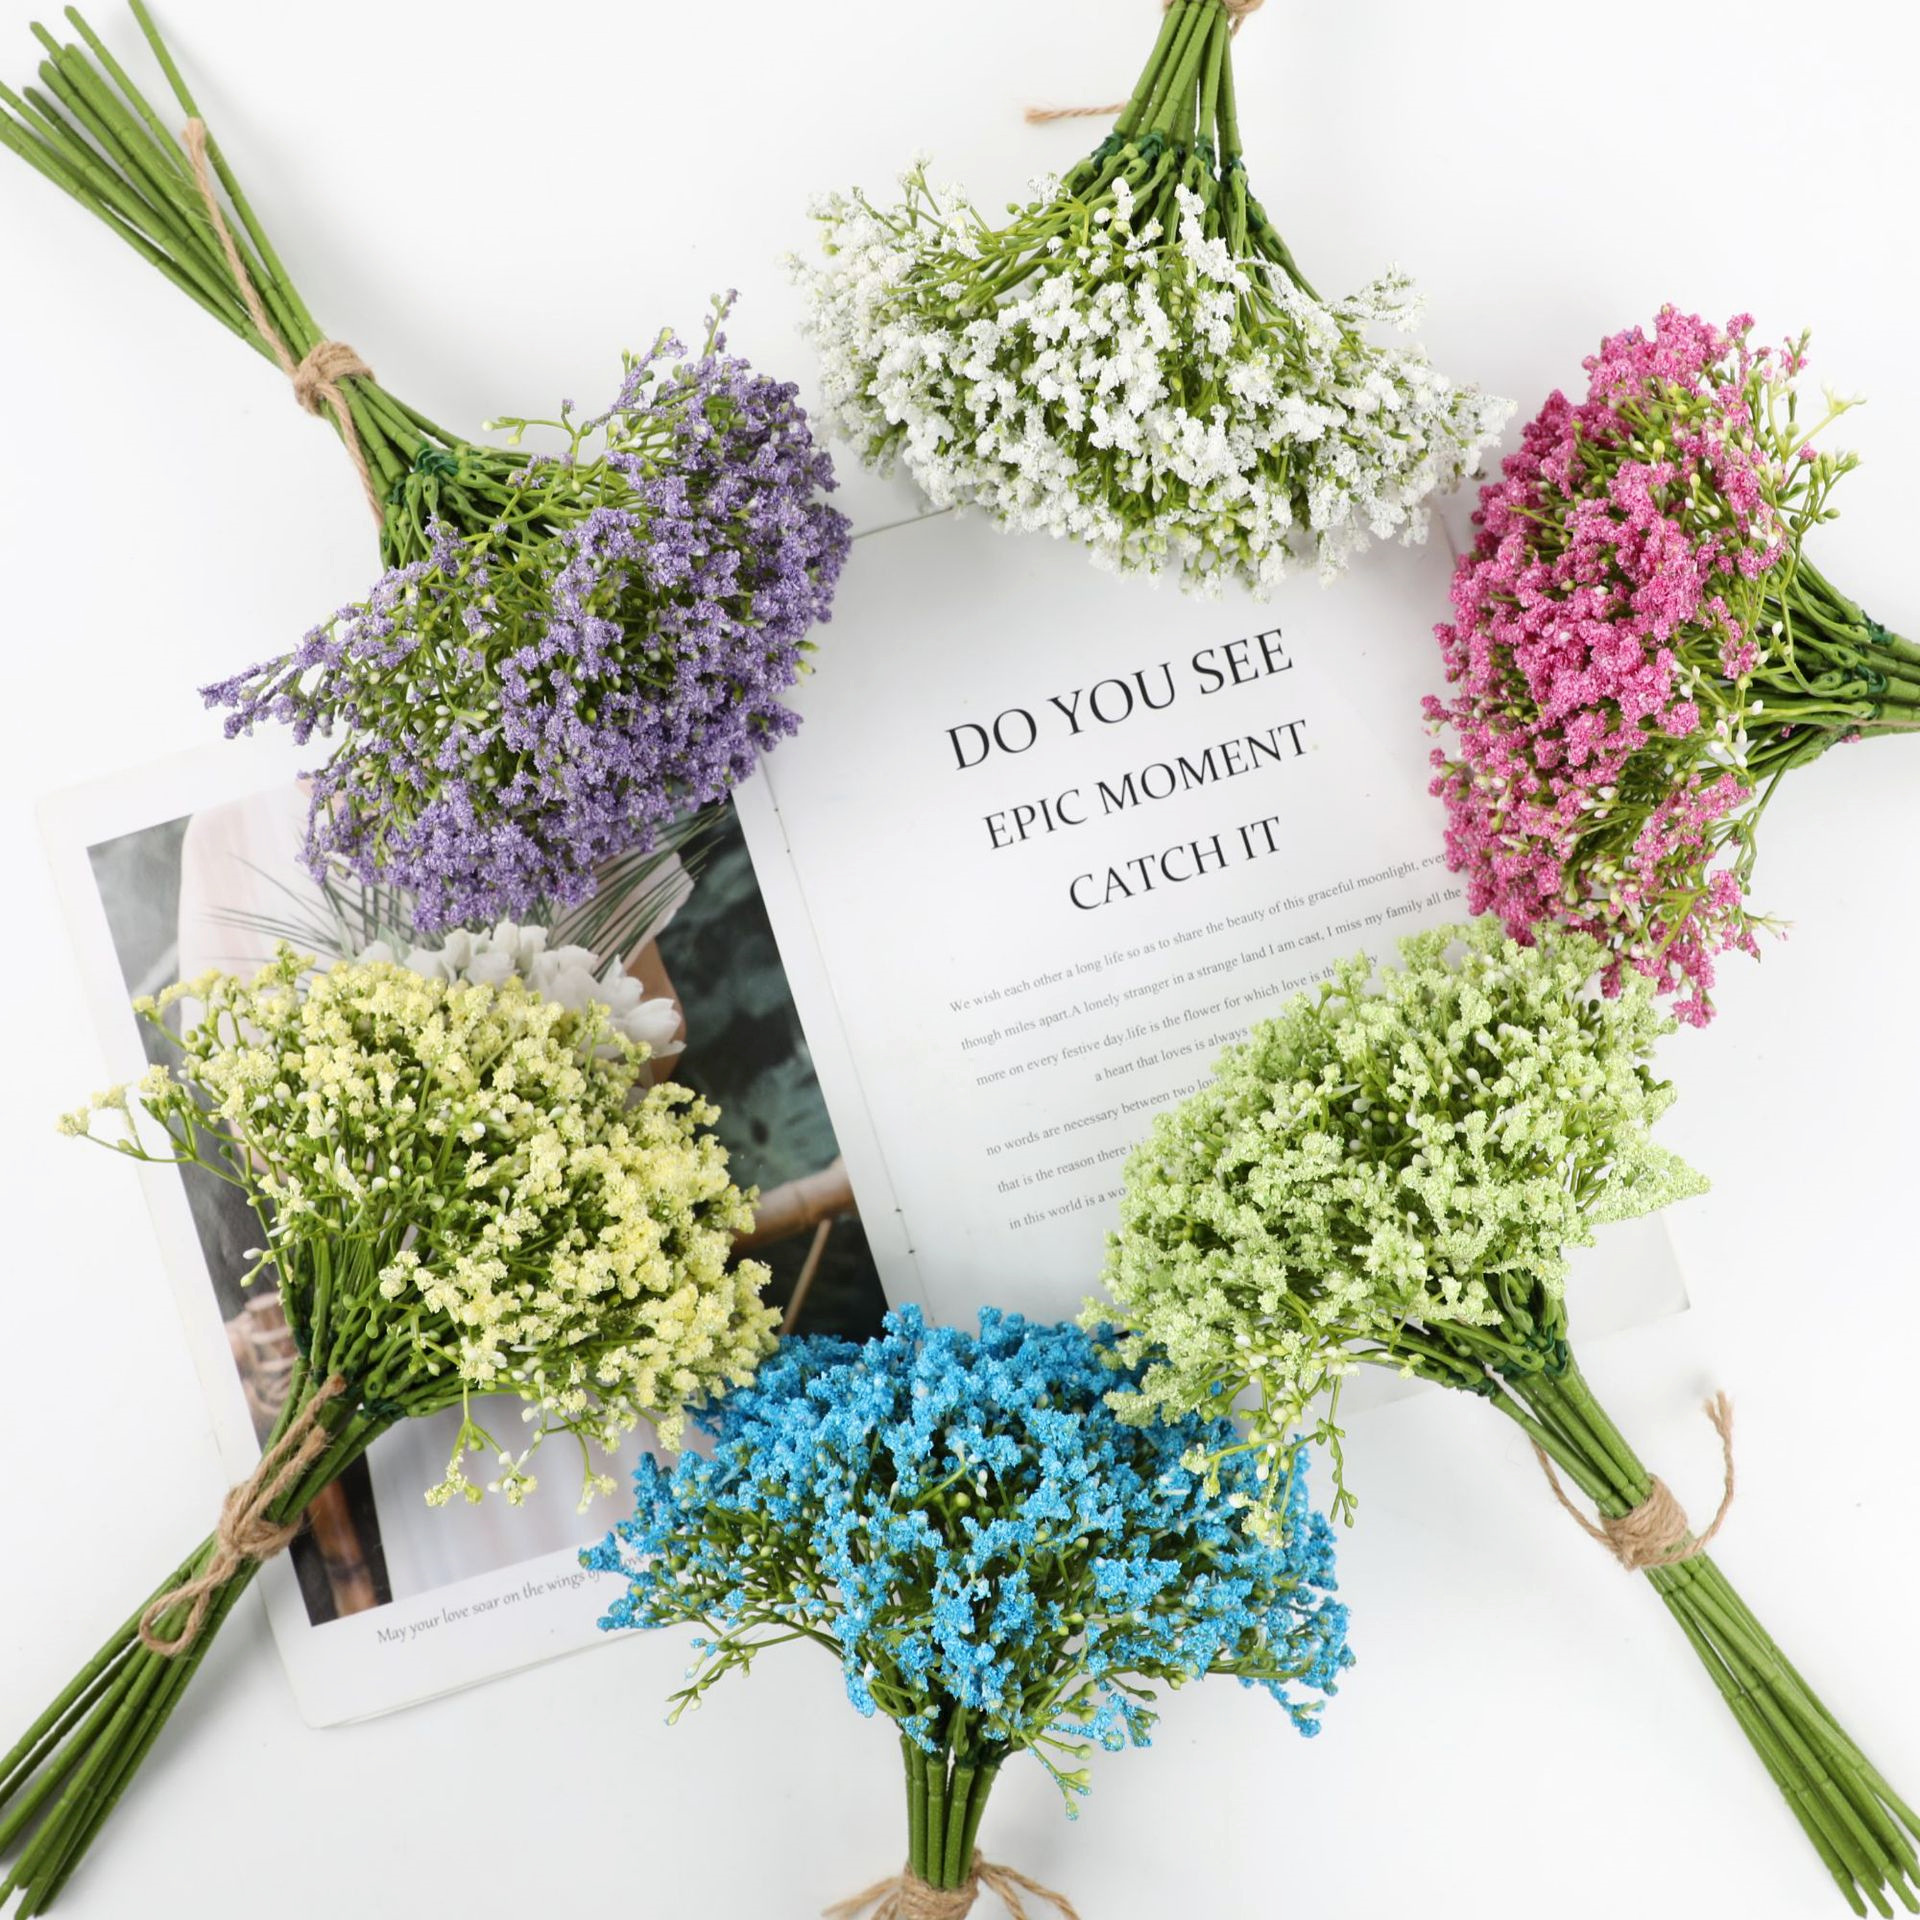 Baby Breath Flower: All You Need To Know